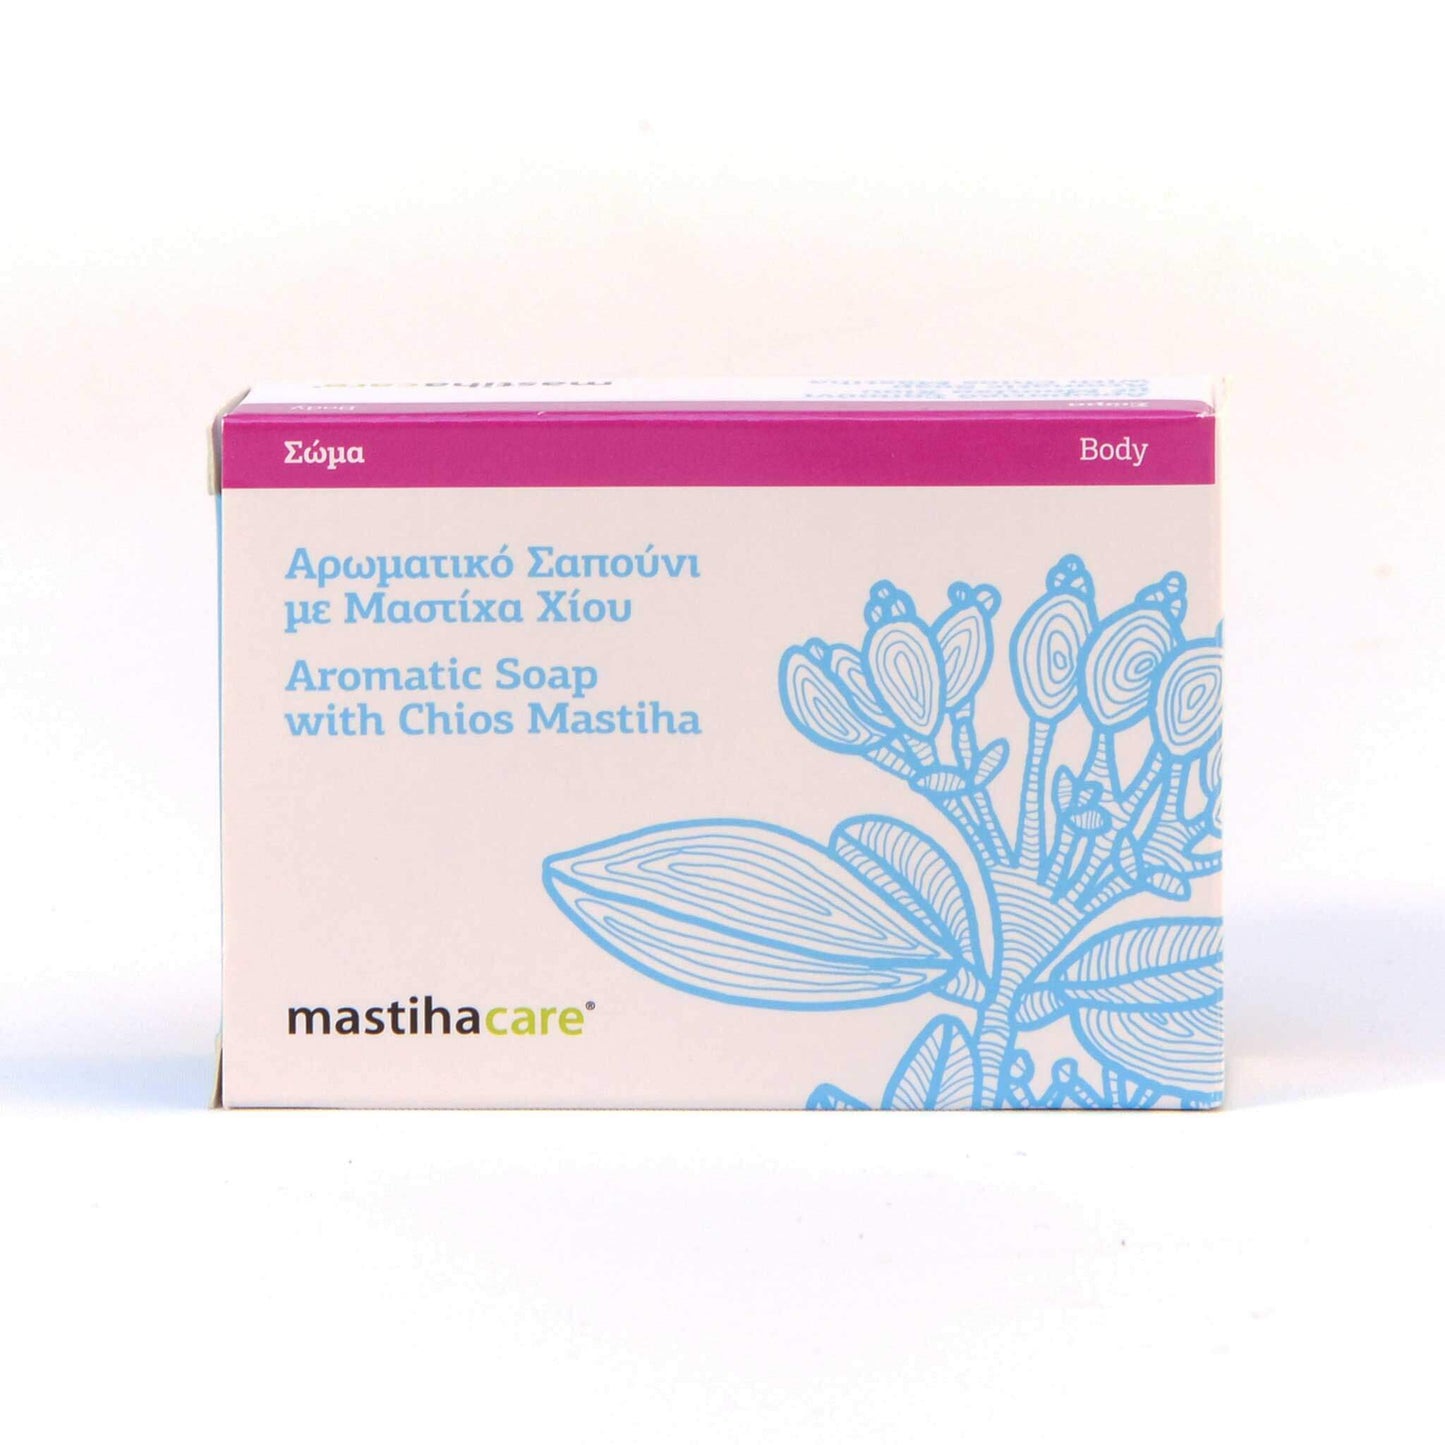 Aromatic soap with Chios mastic